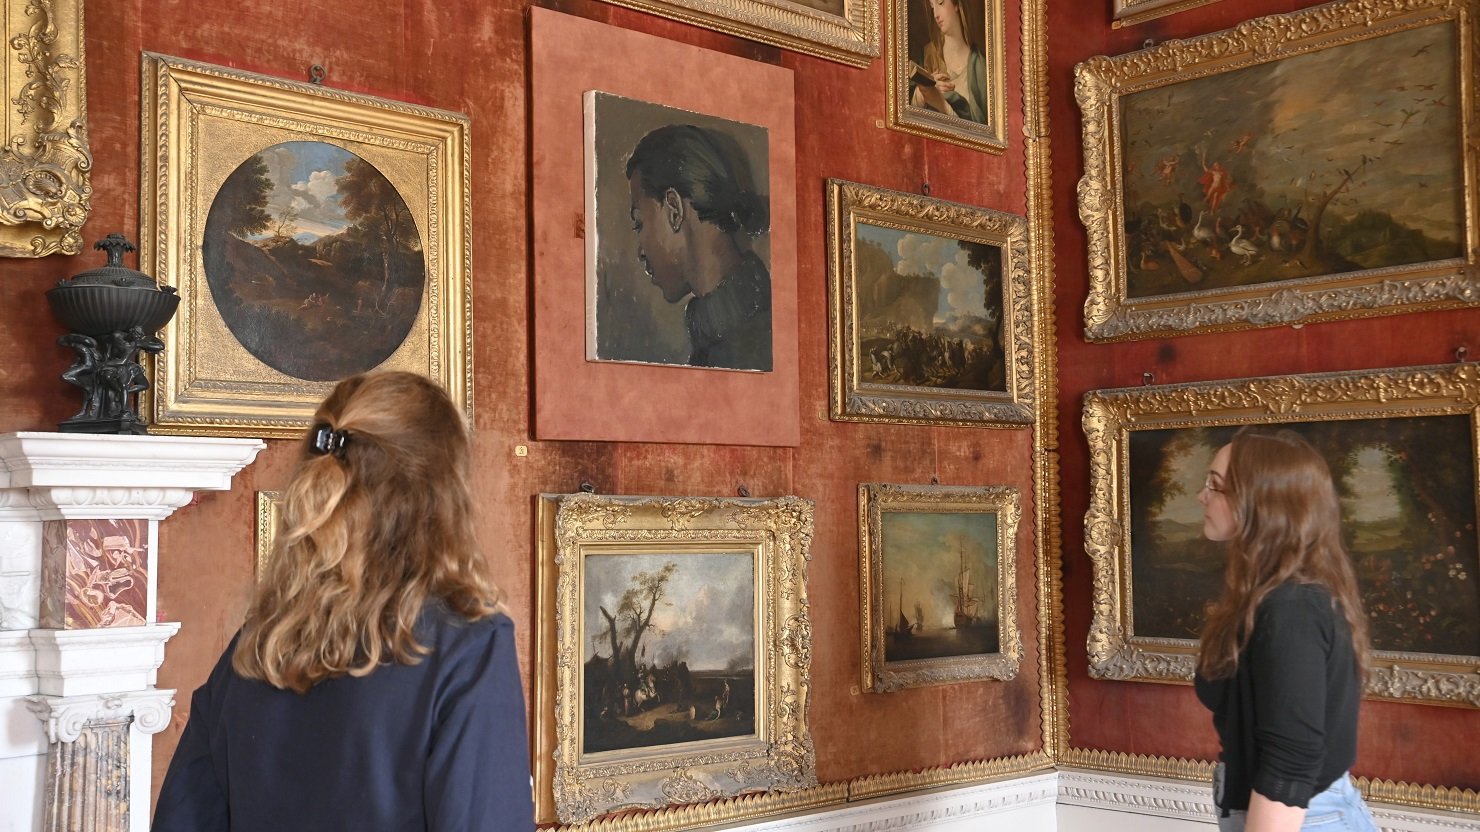 Visitors in the Red Room at Saltram where To Tell Them Where It’s Got To (2013), a small portrait by artist Lynette Yiadom-Boakye is now on display. Credit National Trust Images Jay Williams